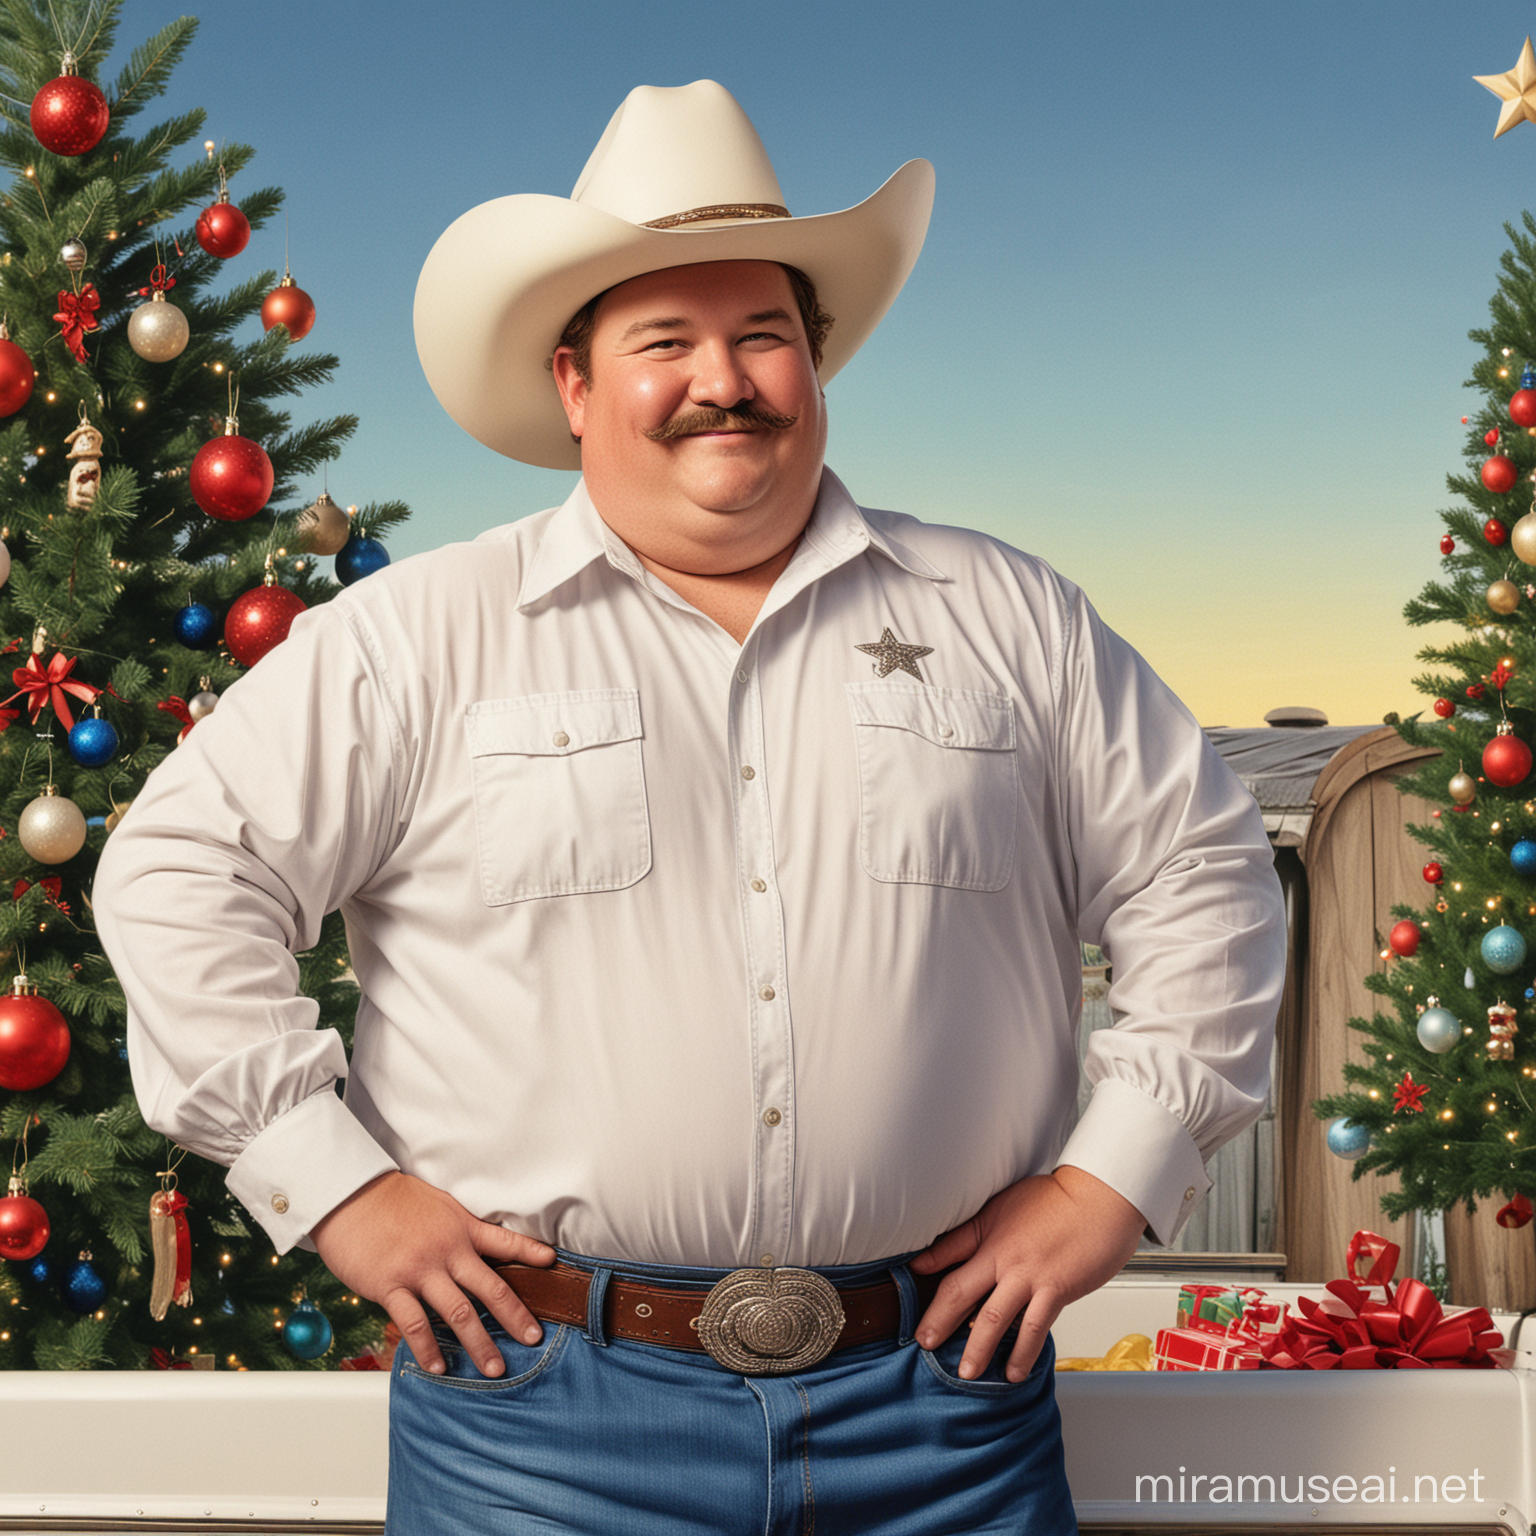 Cheerful Texan Cowboy with Christmas Tree by Pickup Truck